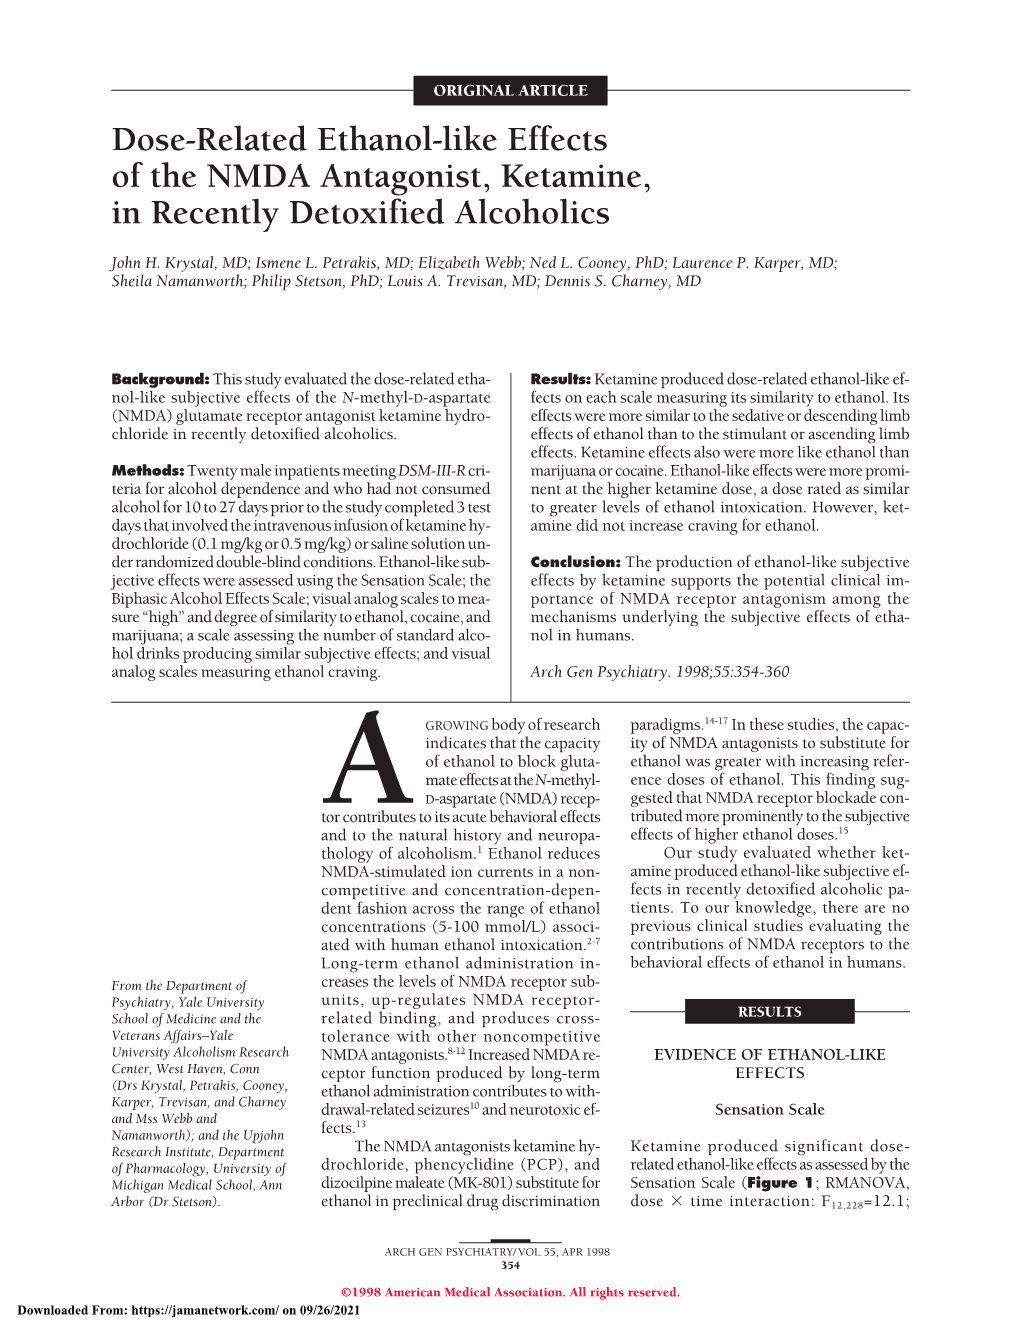 Dose-Related Ethanol-Like Effects of the NMDA Antagonist, Ketamine, in Recently Detoxified Alcoholics